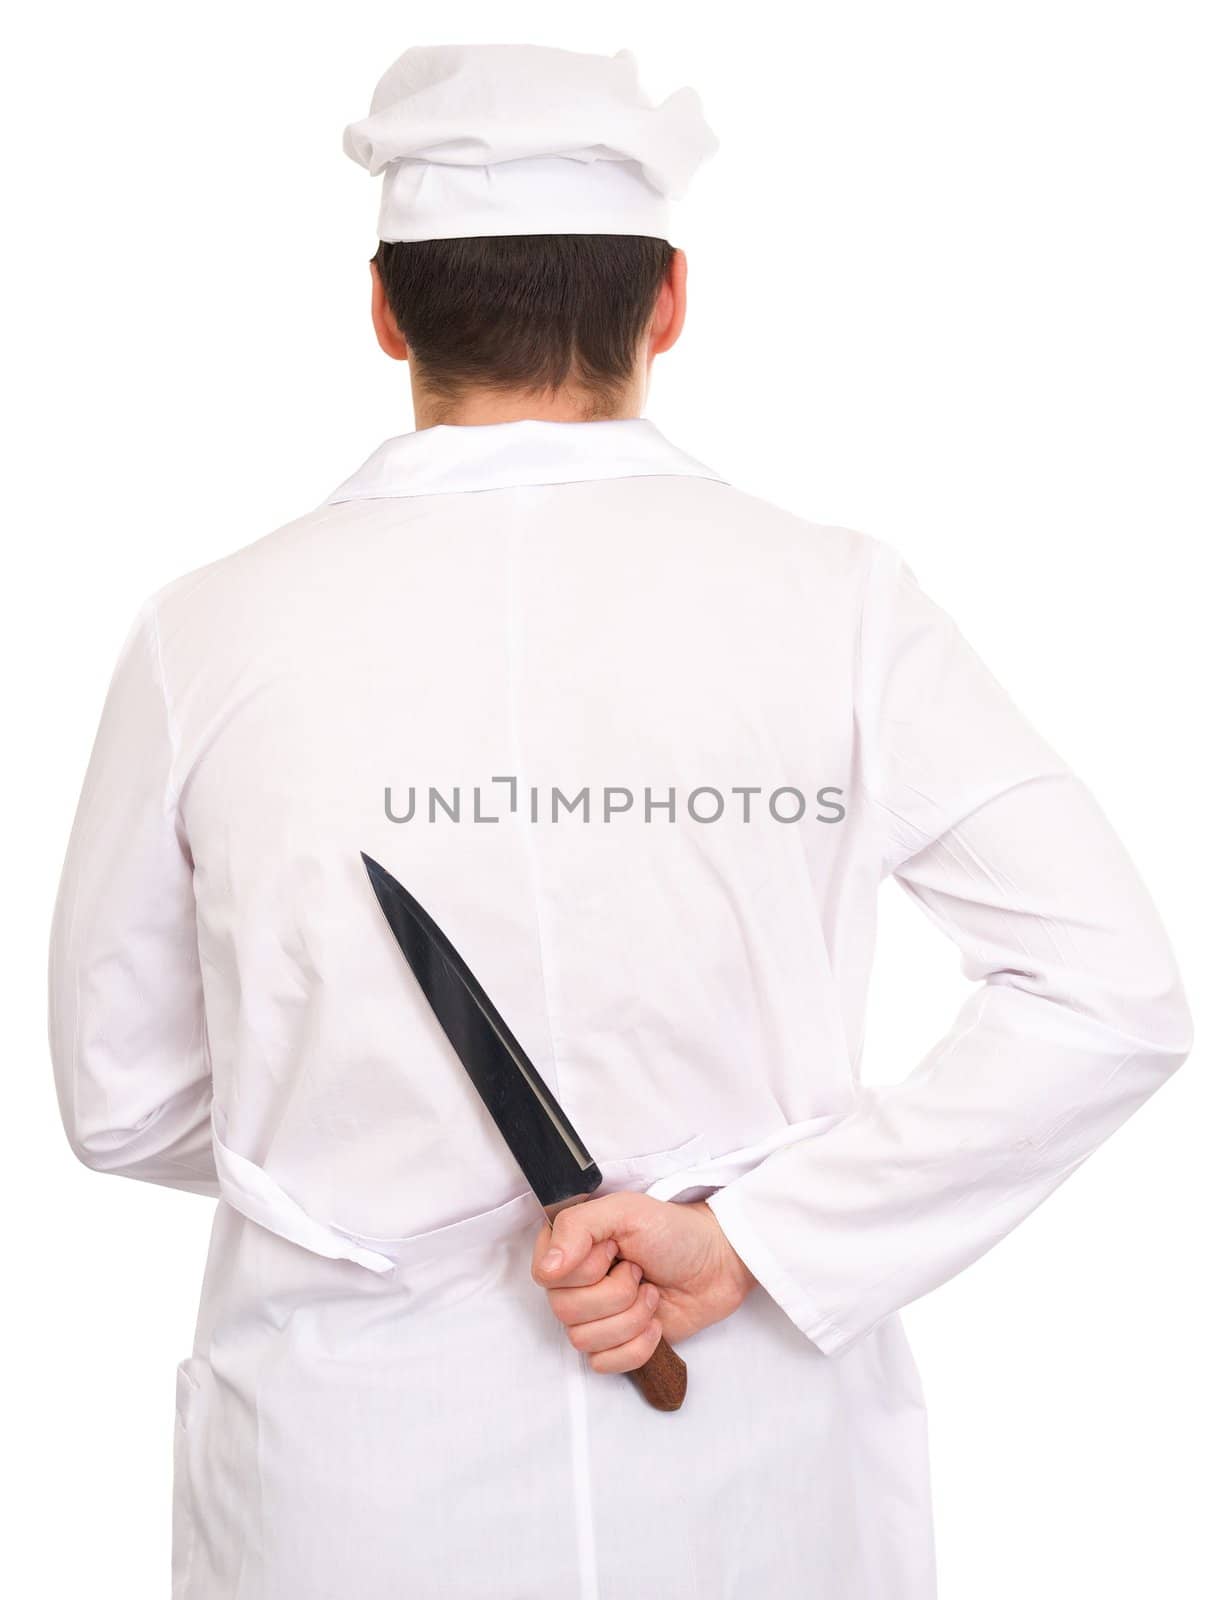 Cook in a white dressing-gown holding in a hand kitchen knife